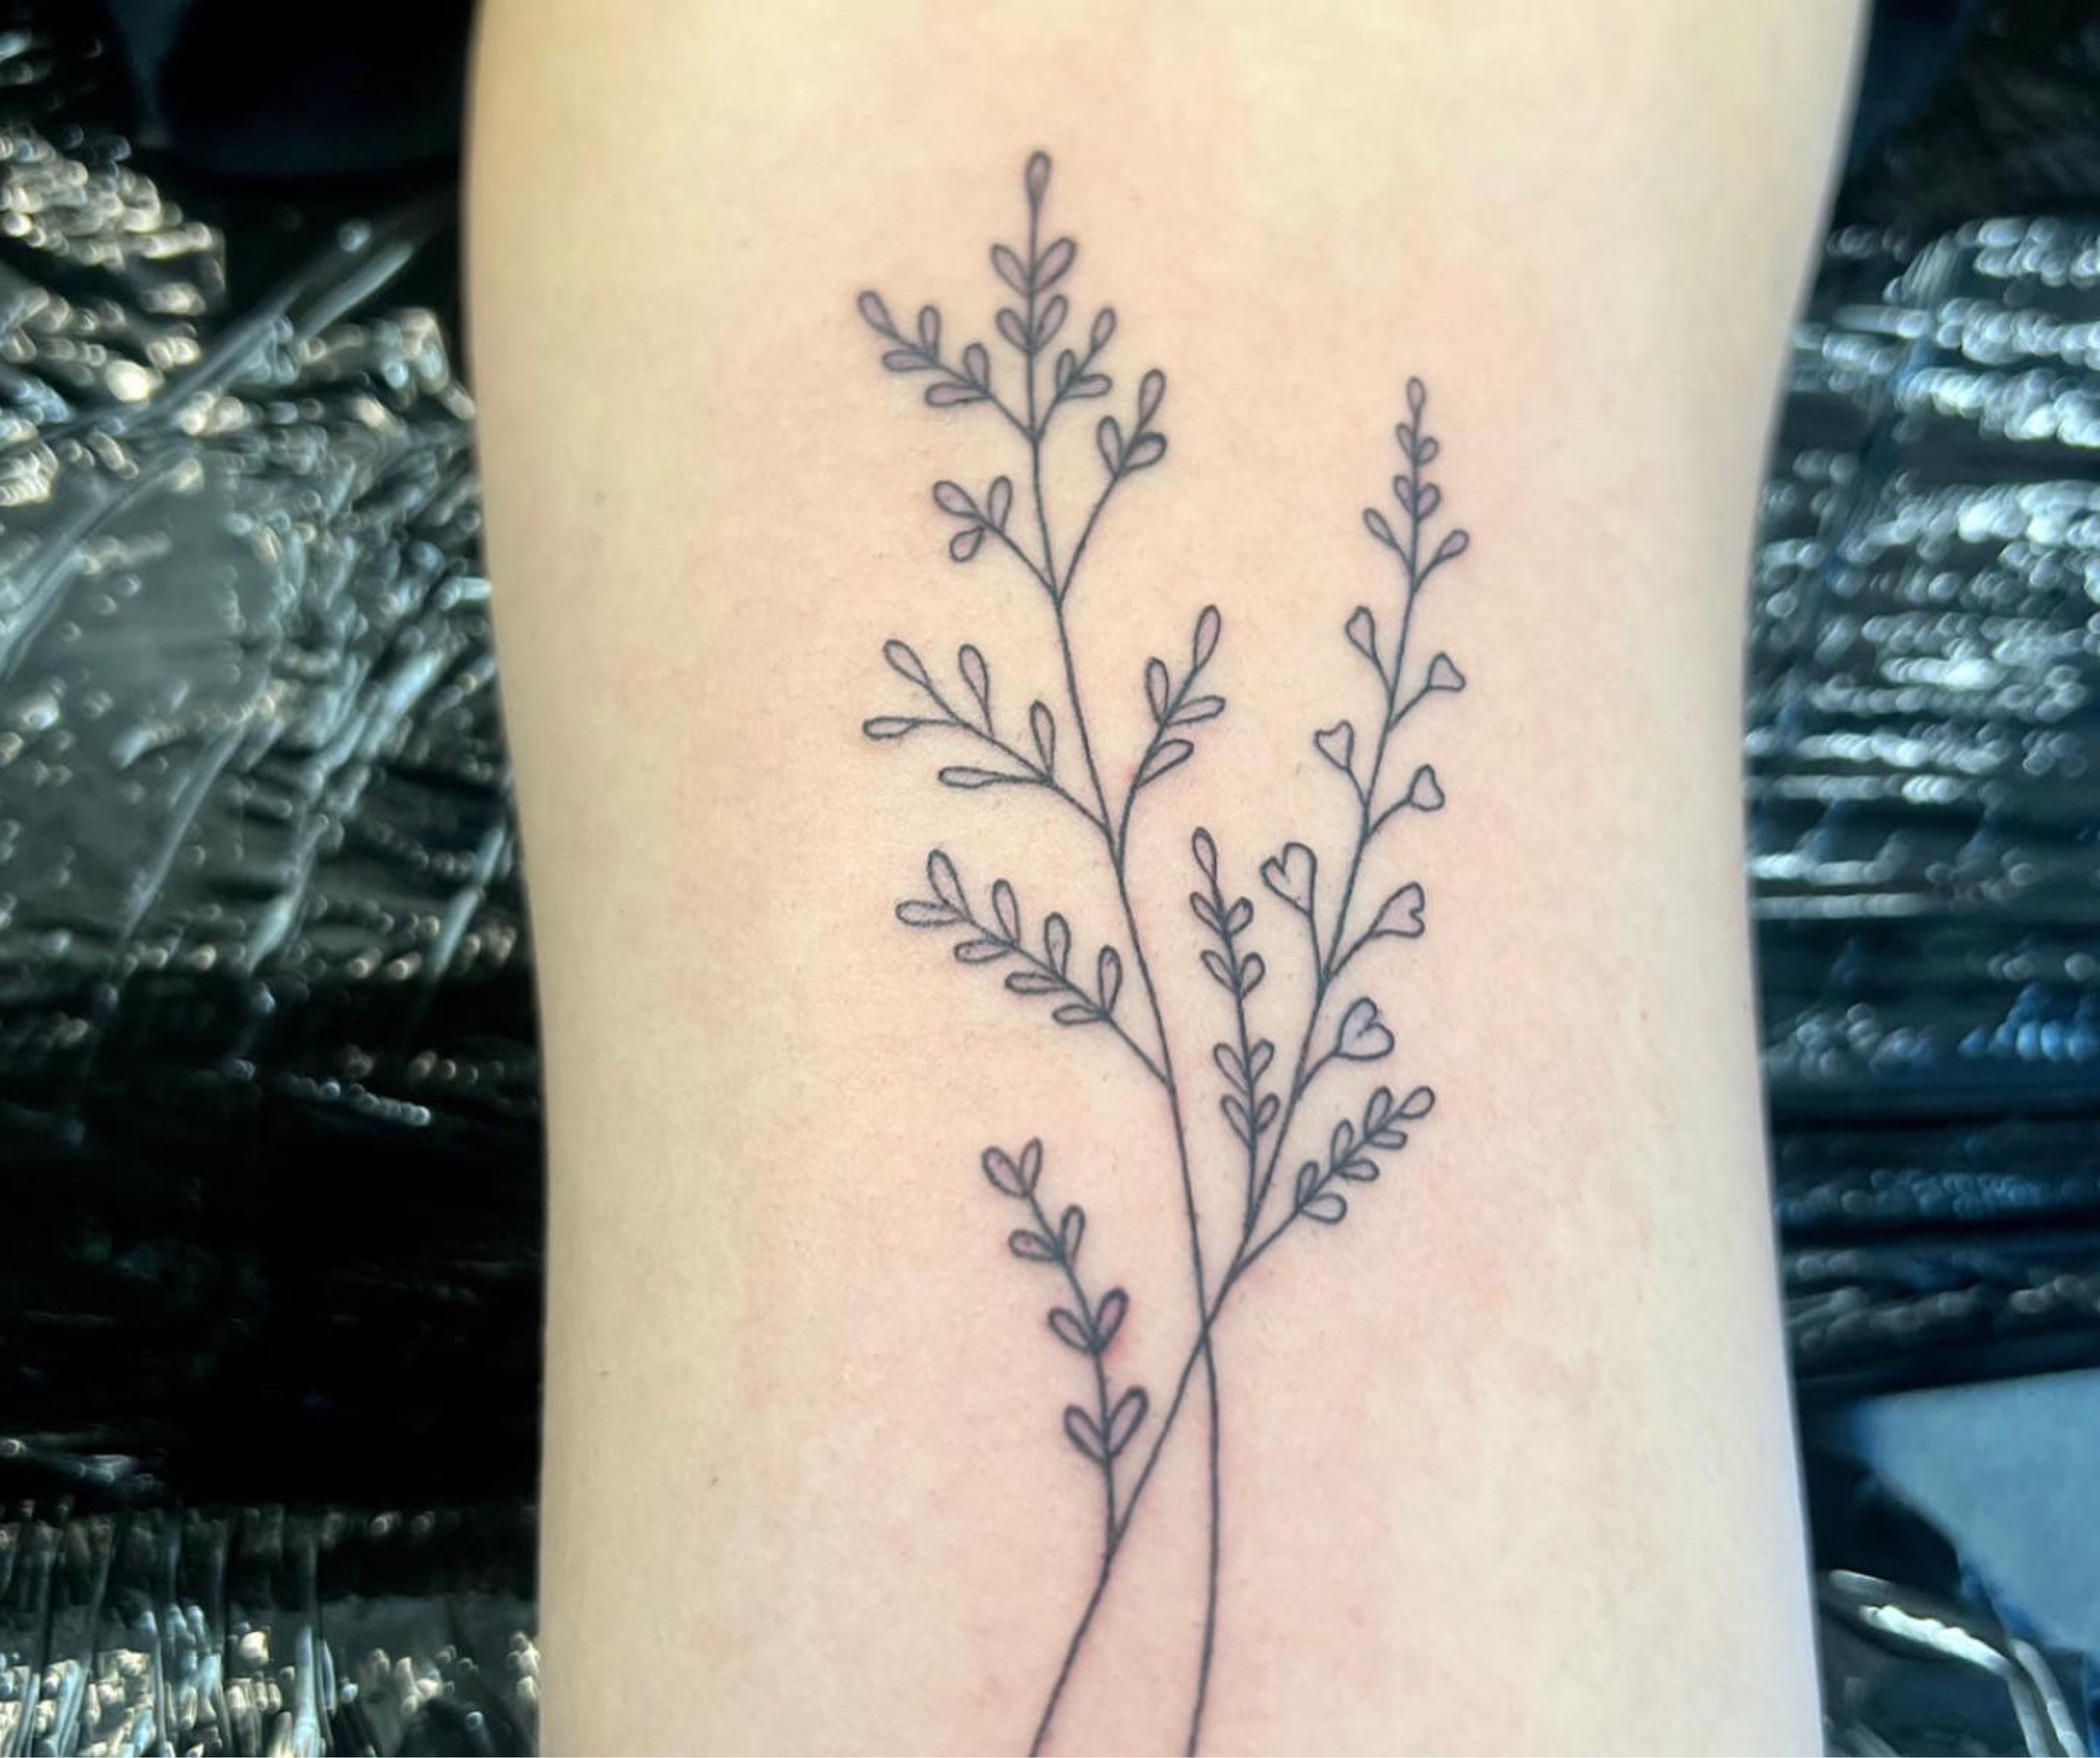 Alive Tattoo Studio Singapore  Heather flower tattoo Symbolizing  admiration and good luck heather is also believed have protective powers  flowertattoo minimalisttattoo singaporetattoos alivetattoo smalltattoos  sgtattooartist  Facebook